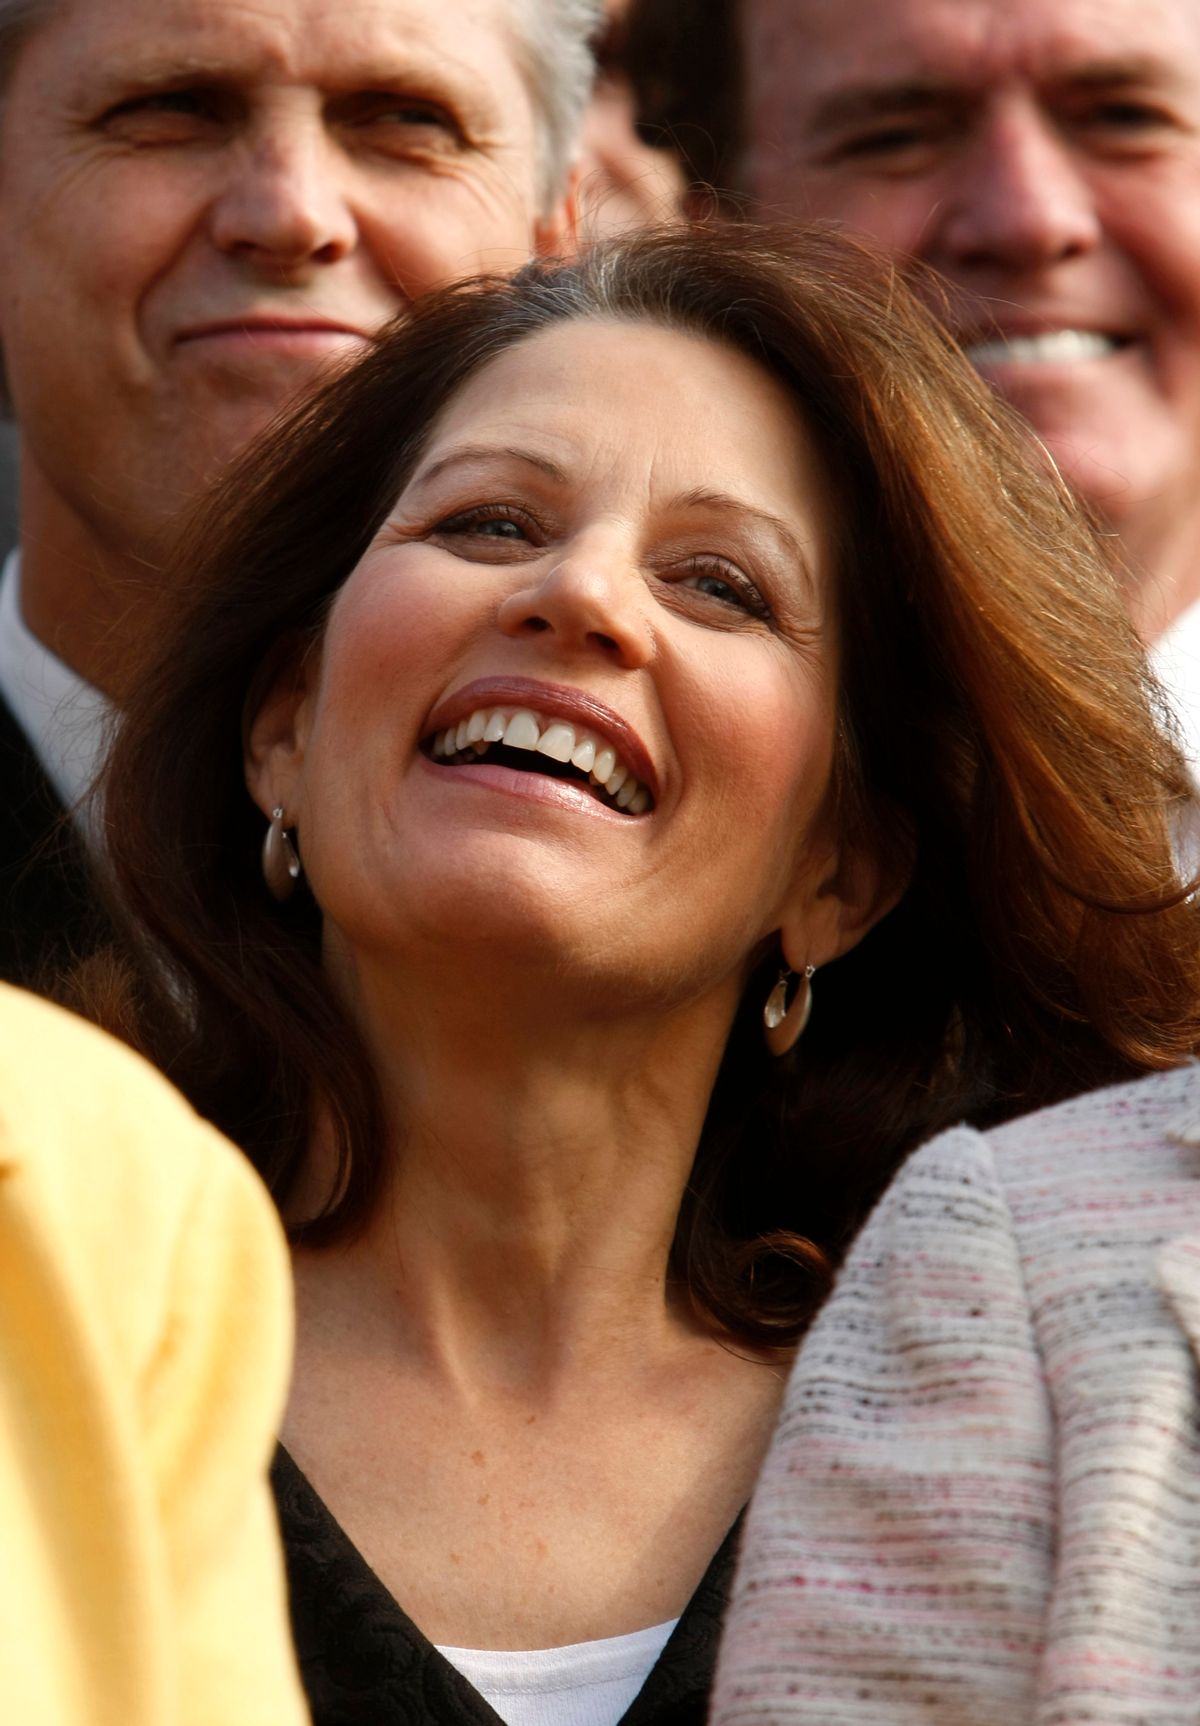 Minnesota Republican Representative Michele Bachmann smiles at a "House Call" rally against proposed healthcare legislation at the Capitol in Washington November 5, 2009.    REUTERS/Kevin Lamarque   (UNITED STATES POLITICS HEALTH) (Reuters)